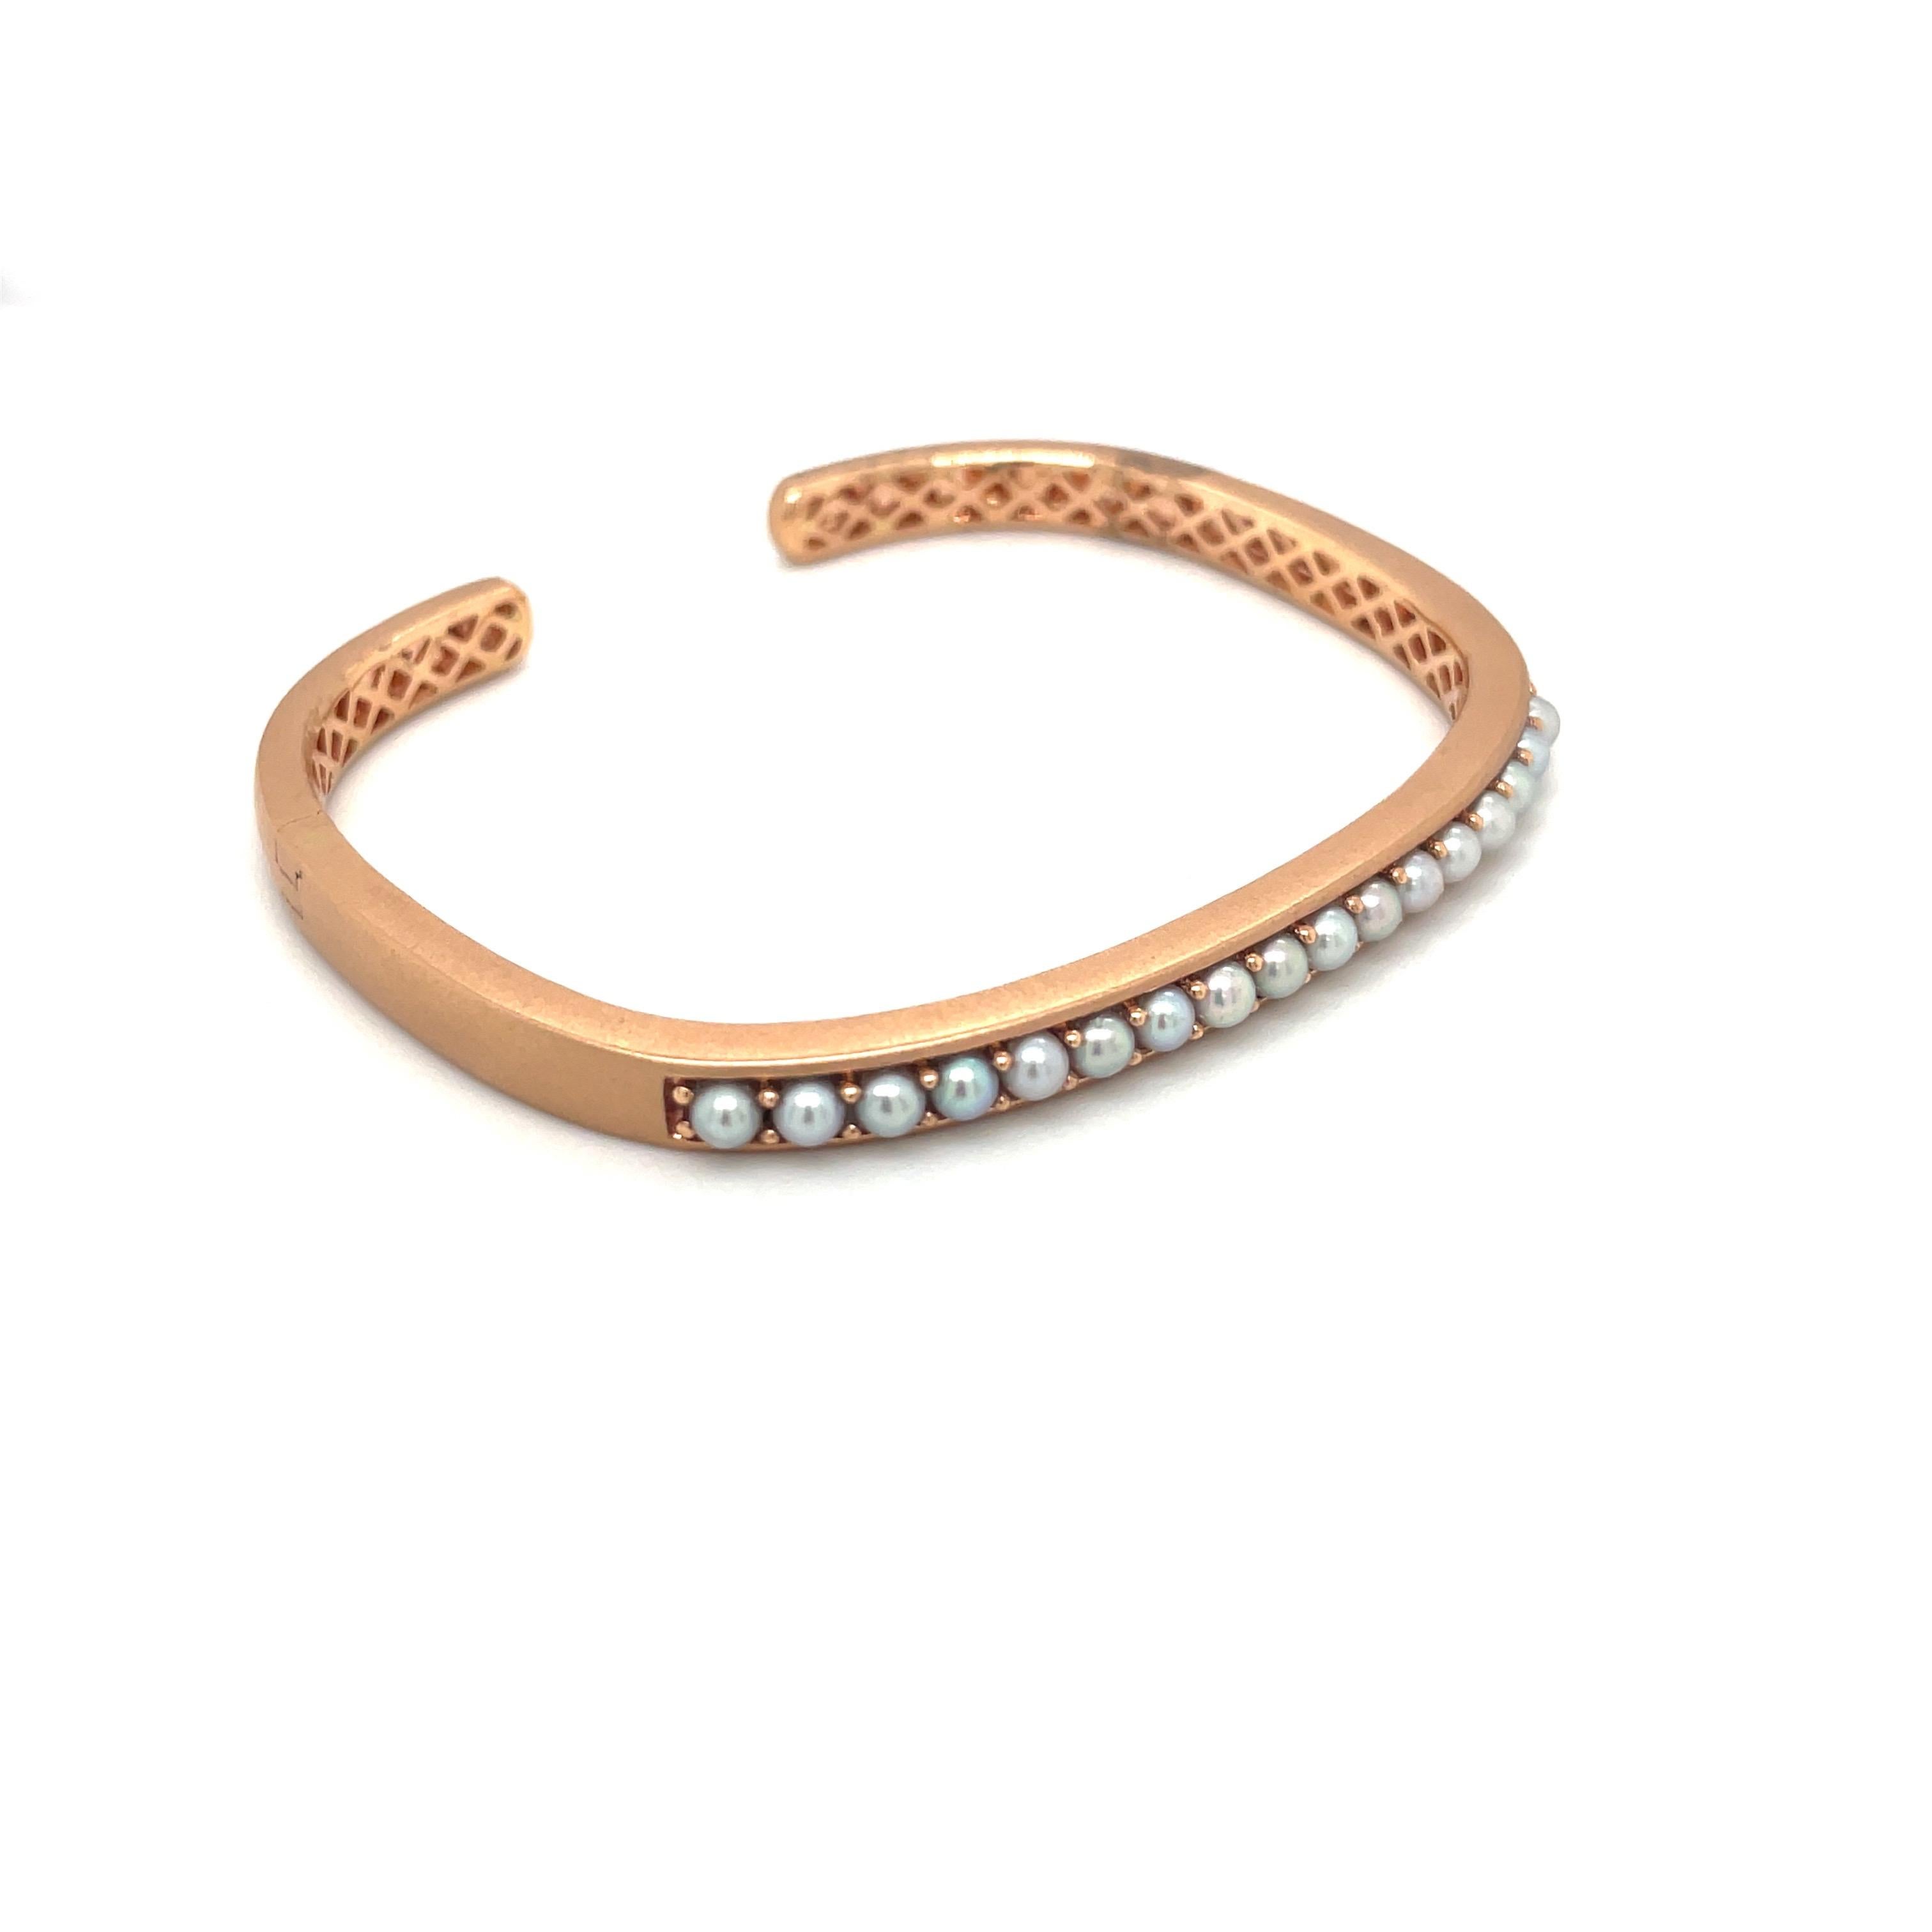 Jane Taylor Jewelry is a family run company focused on creating modern heirlooms since 1994.
This 18 karat rose gold cuff bracelet has a squarish shape and a matte finish. It is set across the top with 17  3mm Pearls The bracelet has an invisible